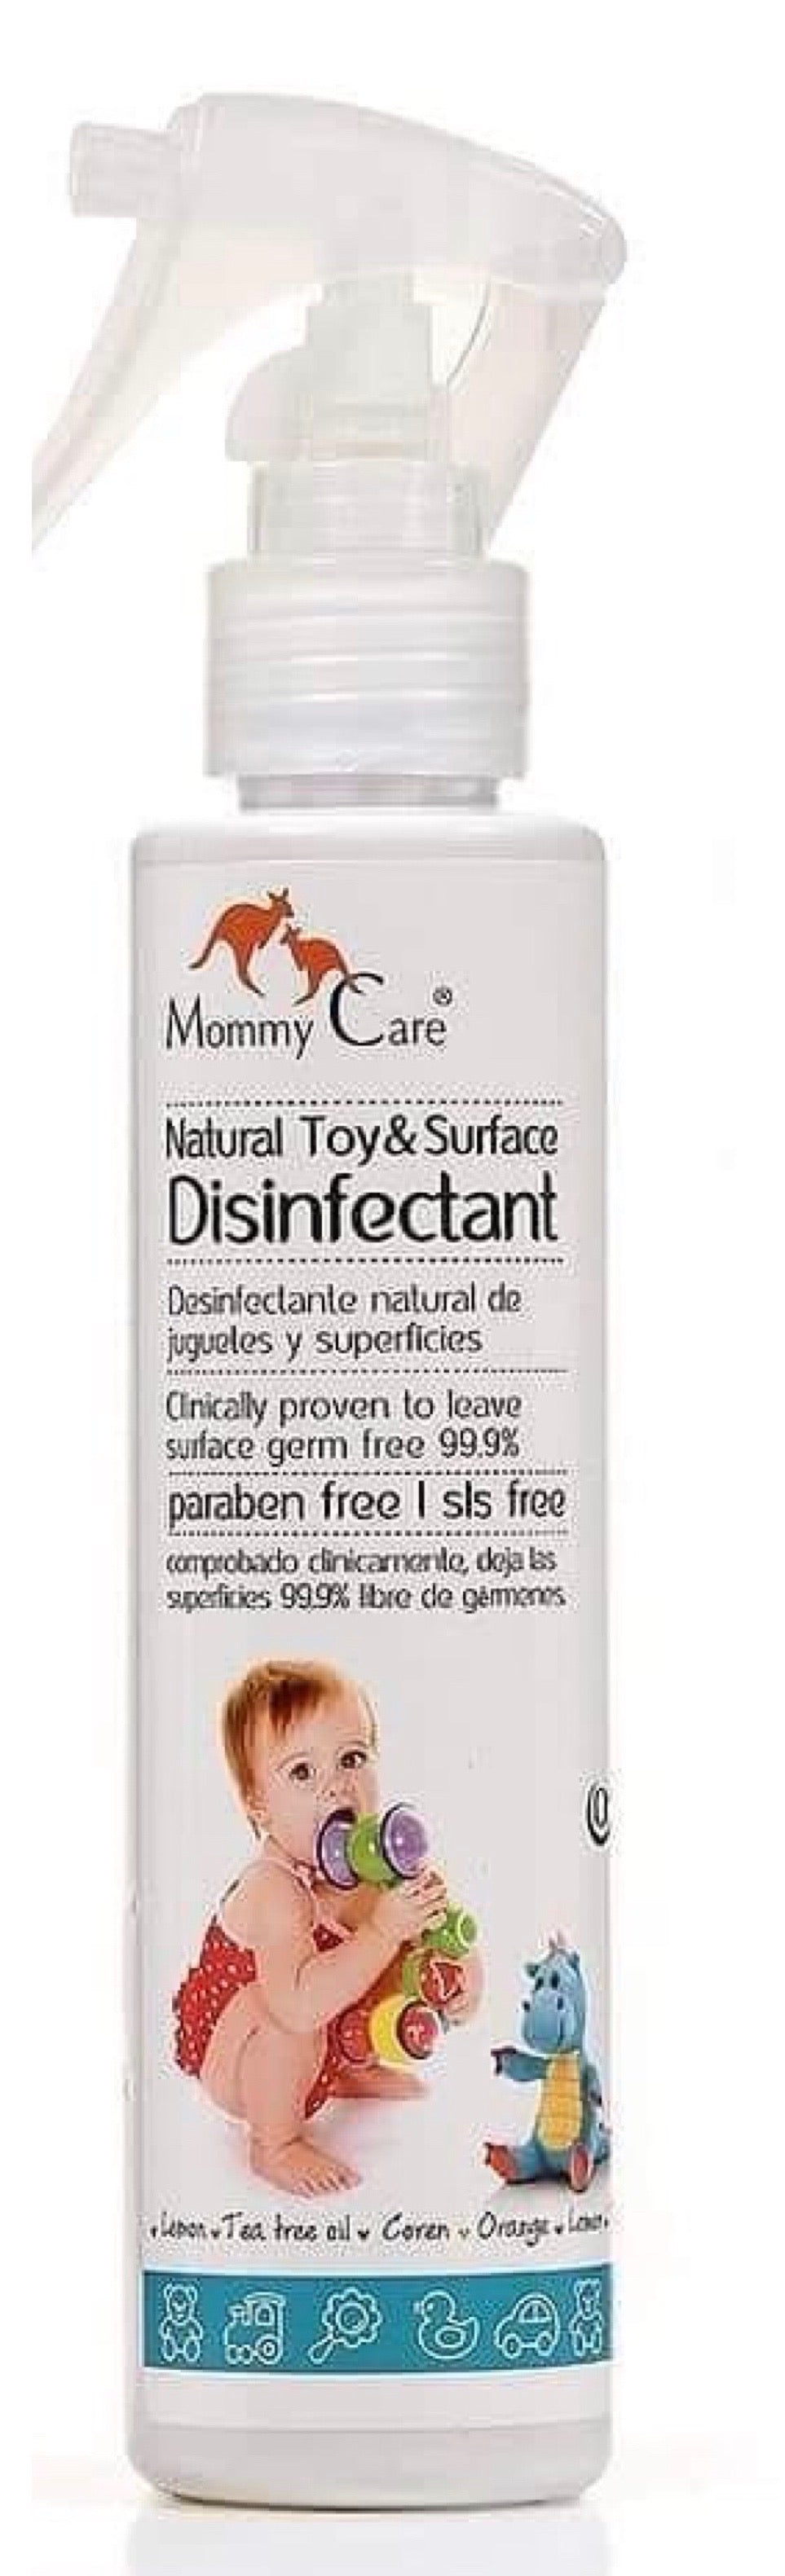 Natural toy and surface disinfectant spray